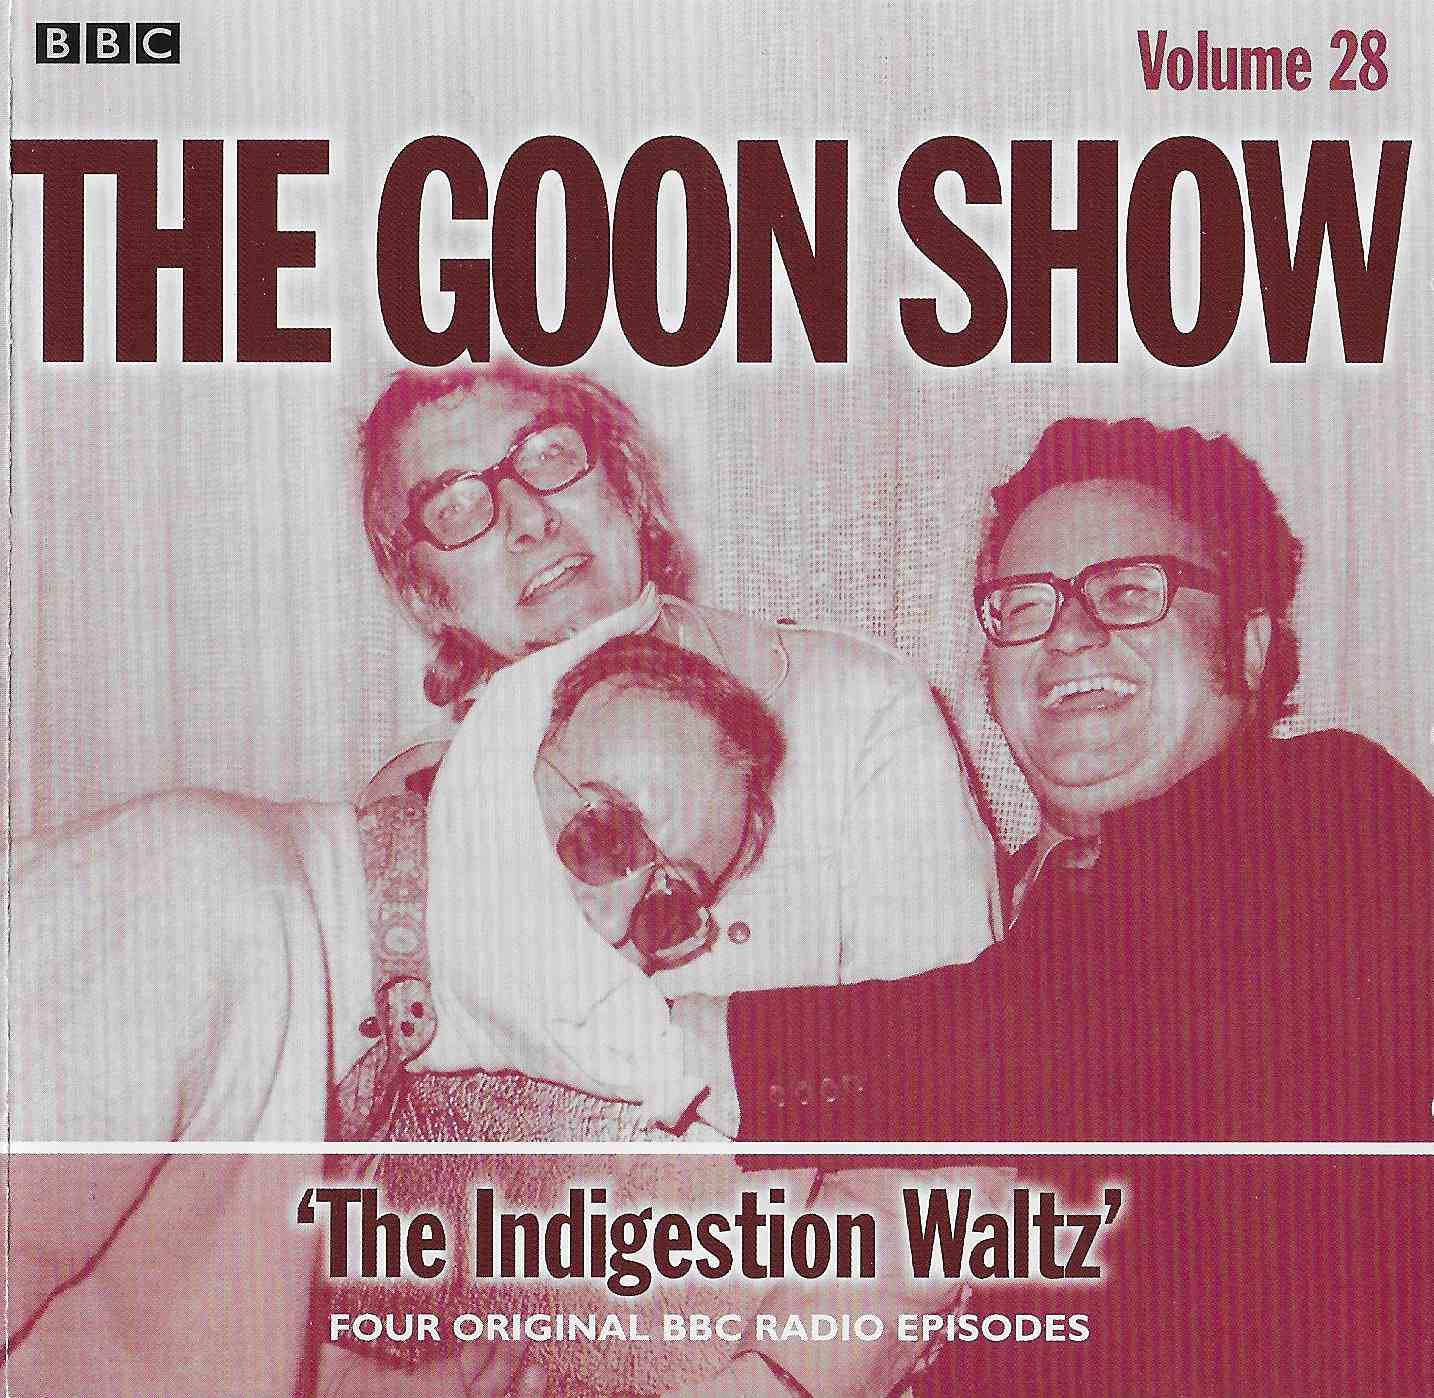 Picture of ISBN 978-1-4084-6855-5 The Goon Show 28 - The indigestion waltz by artist Spike Milligan / Larry Stephens from the BBC cds - Records and Tapes library